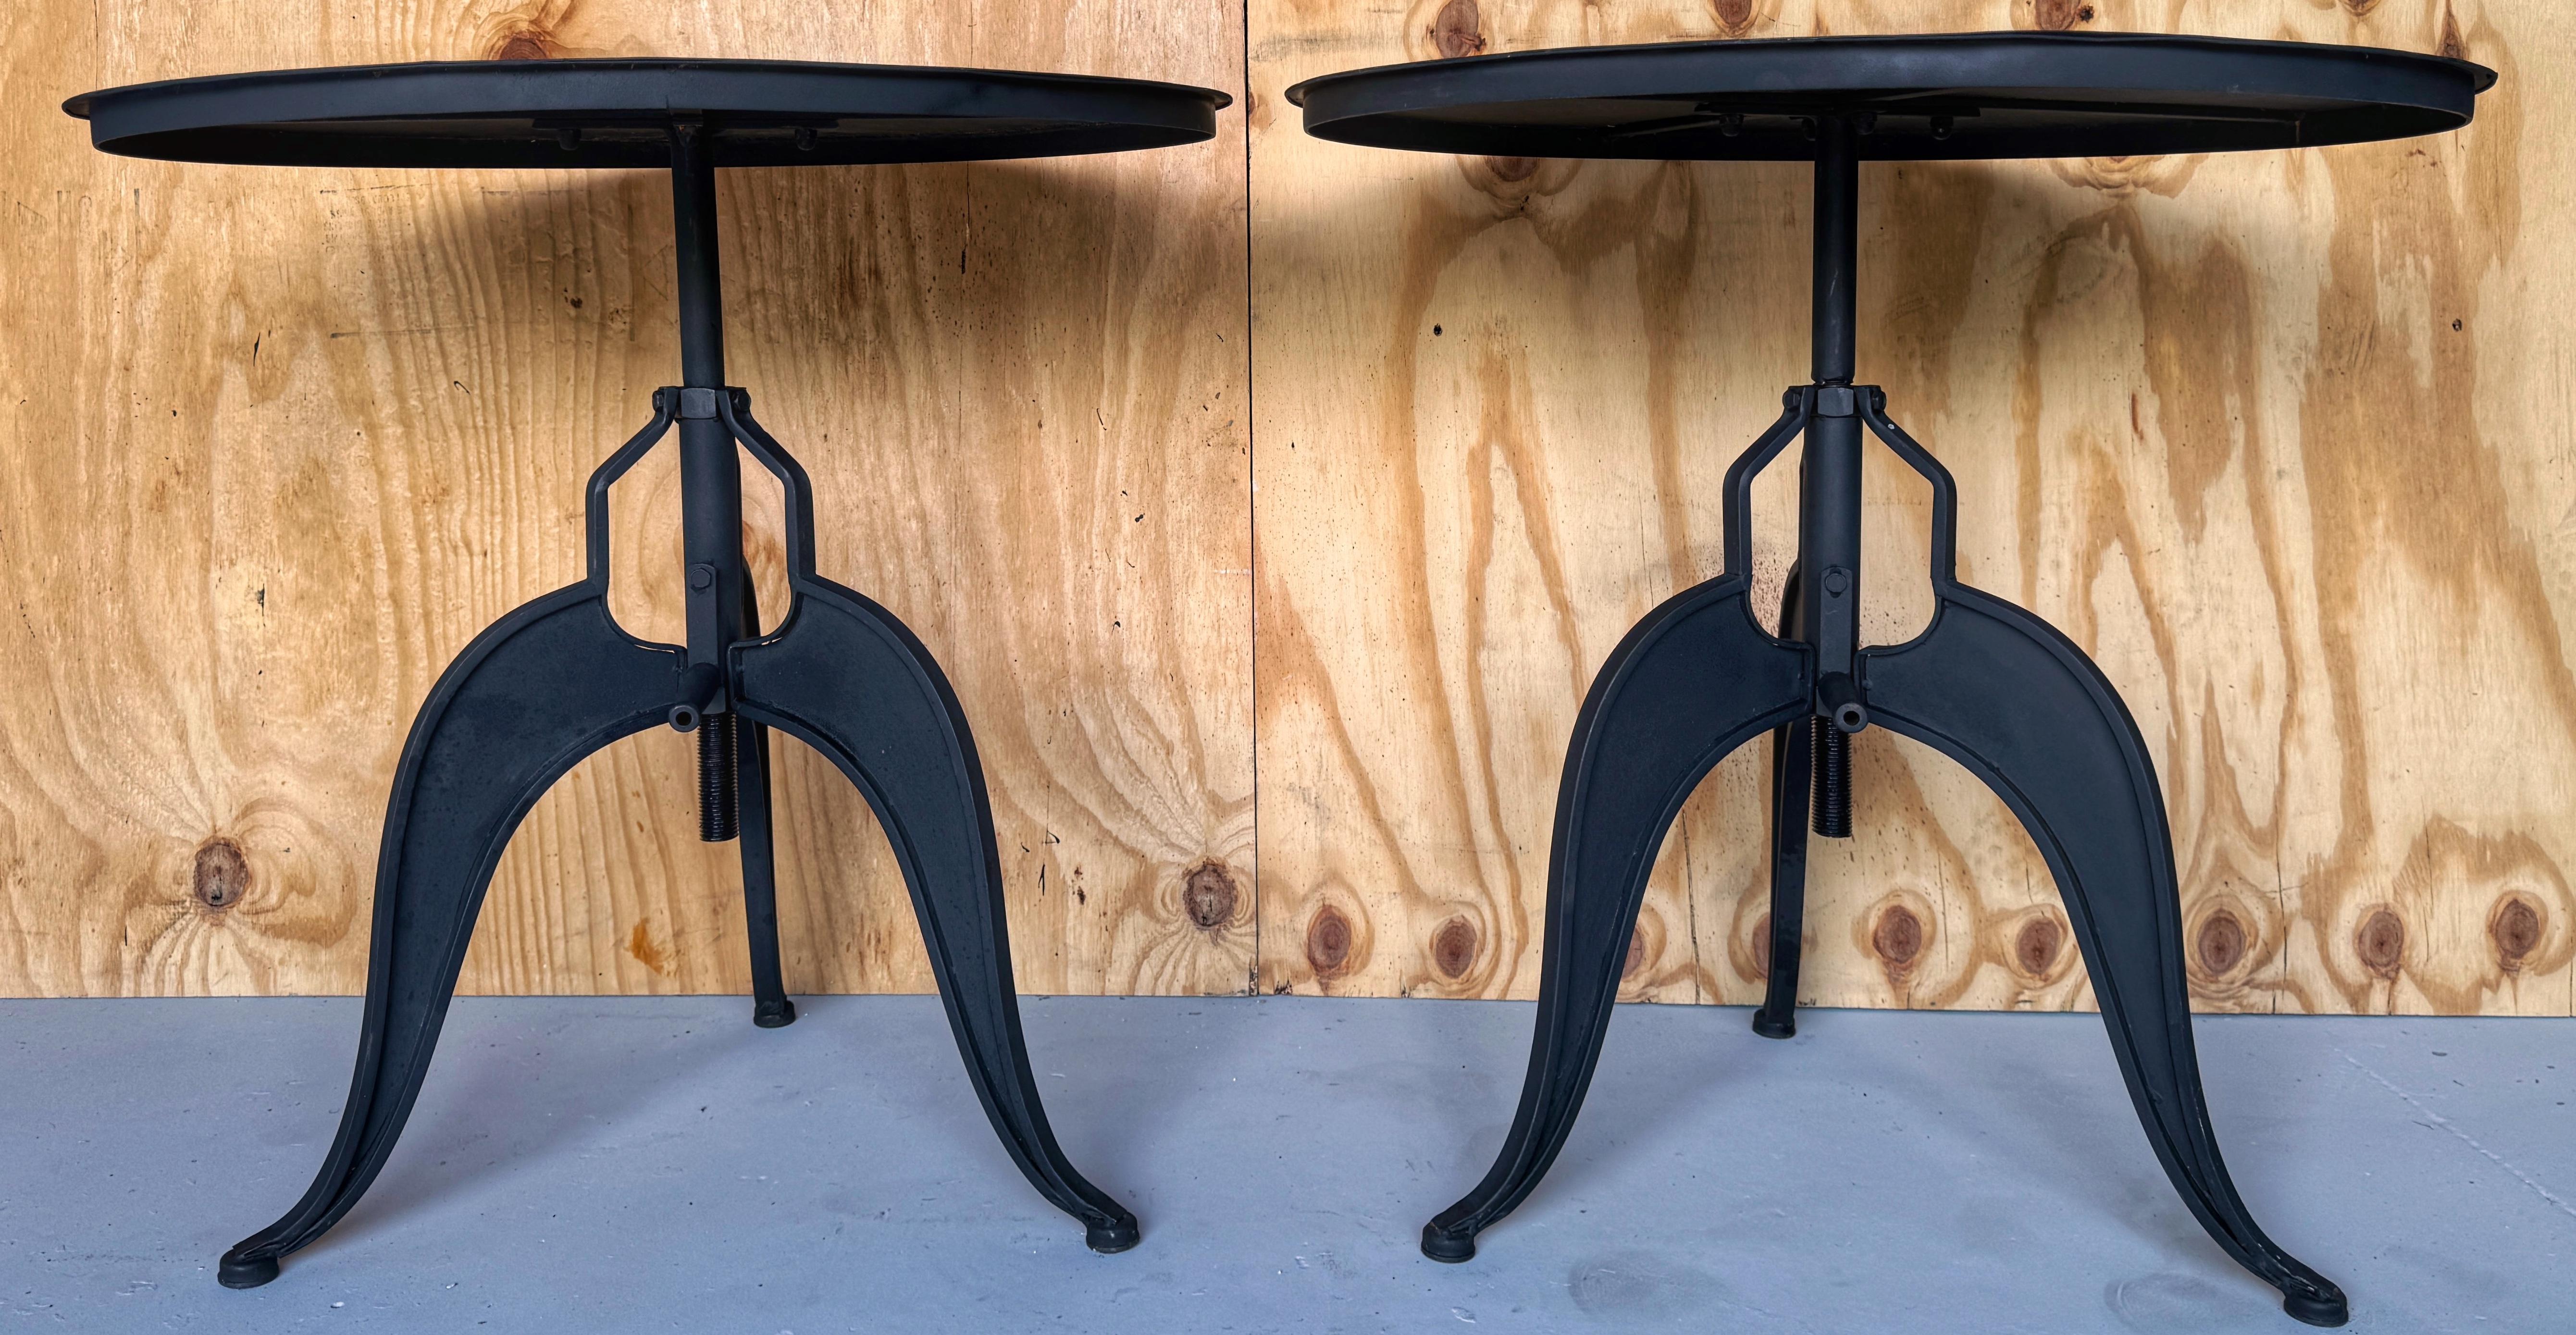 Pair of 20th Century French Industrial Style Adjustable Round Guéridons

Each one with 29.75- inch diameter top with rim, resting on a center column industrial hand -crank adjusting mechanism, with a maximum sturdy height of 40-Inches high that